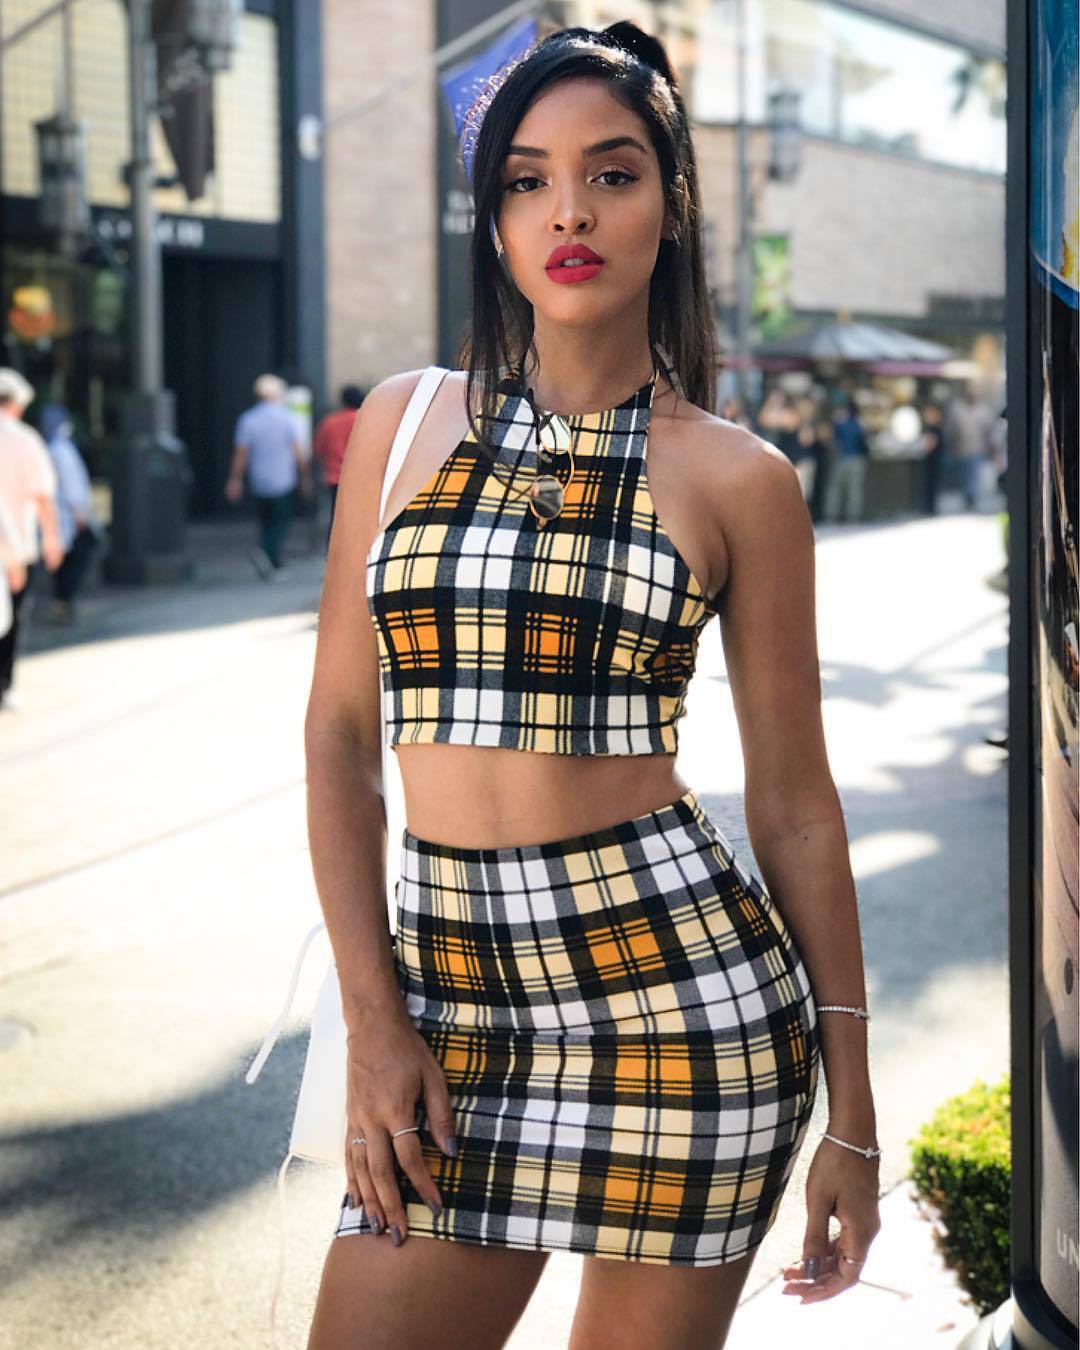 Classy Plaid Skirt With Plaid Crop Top Outfits Skirt Outfits For